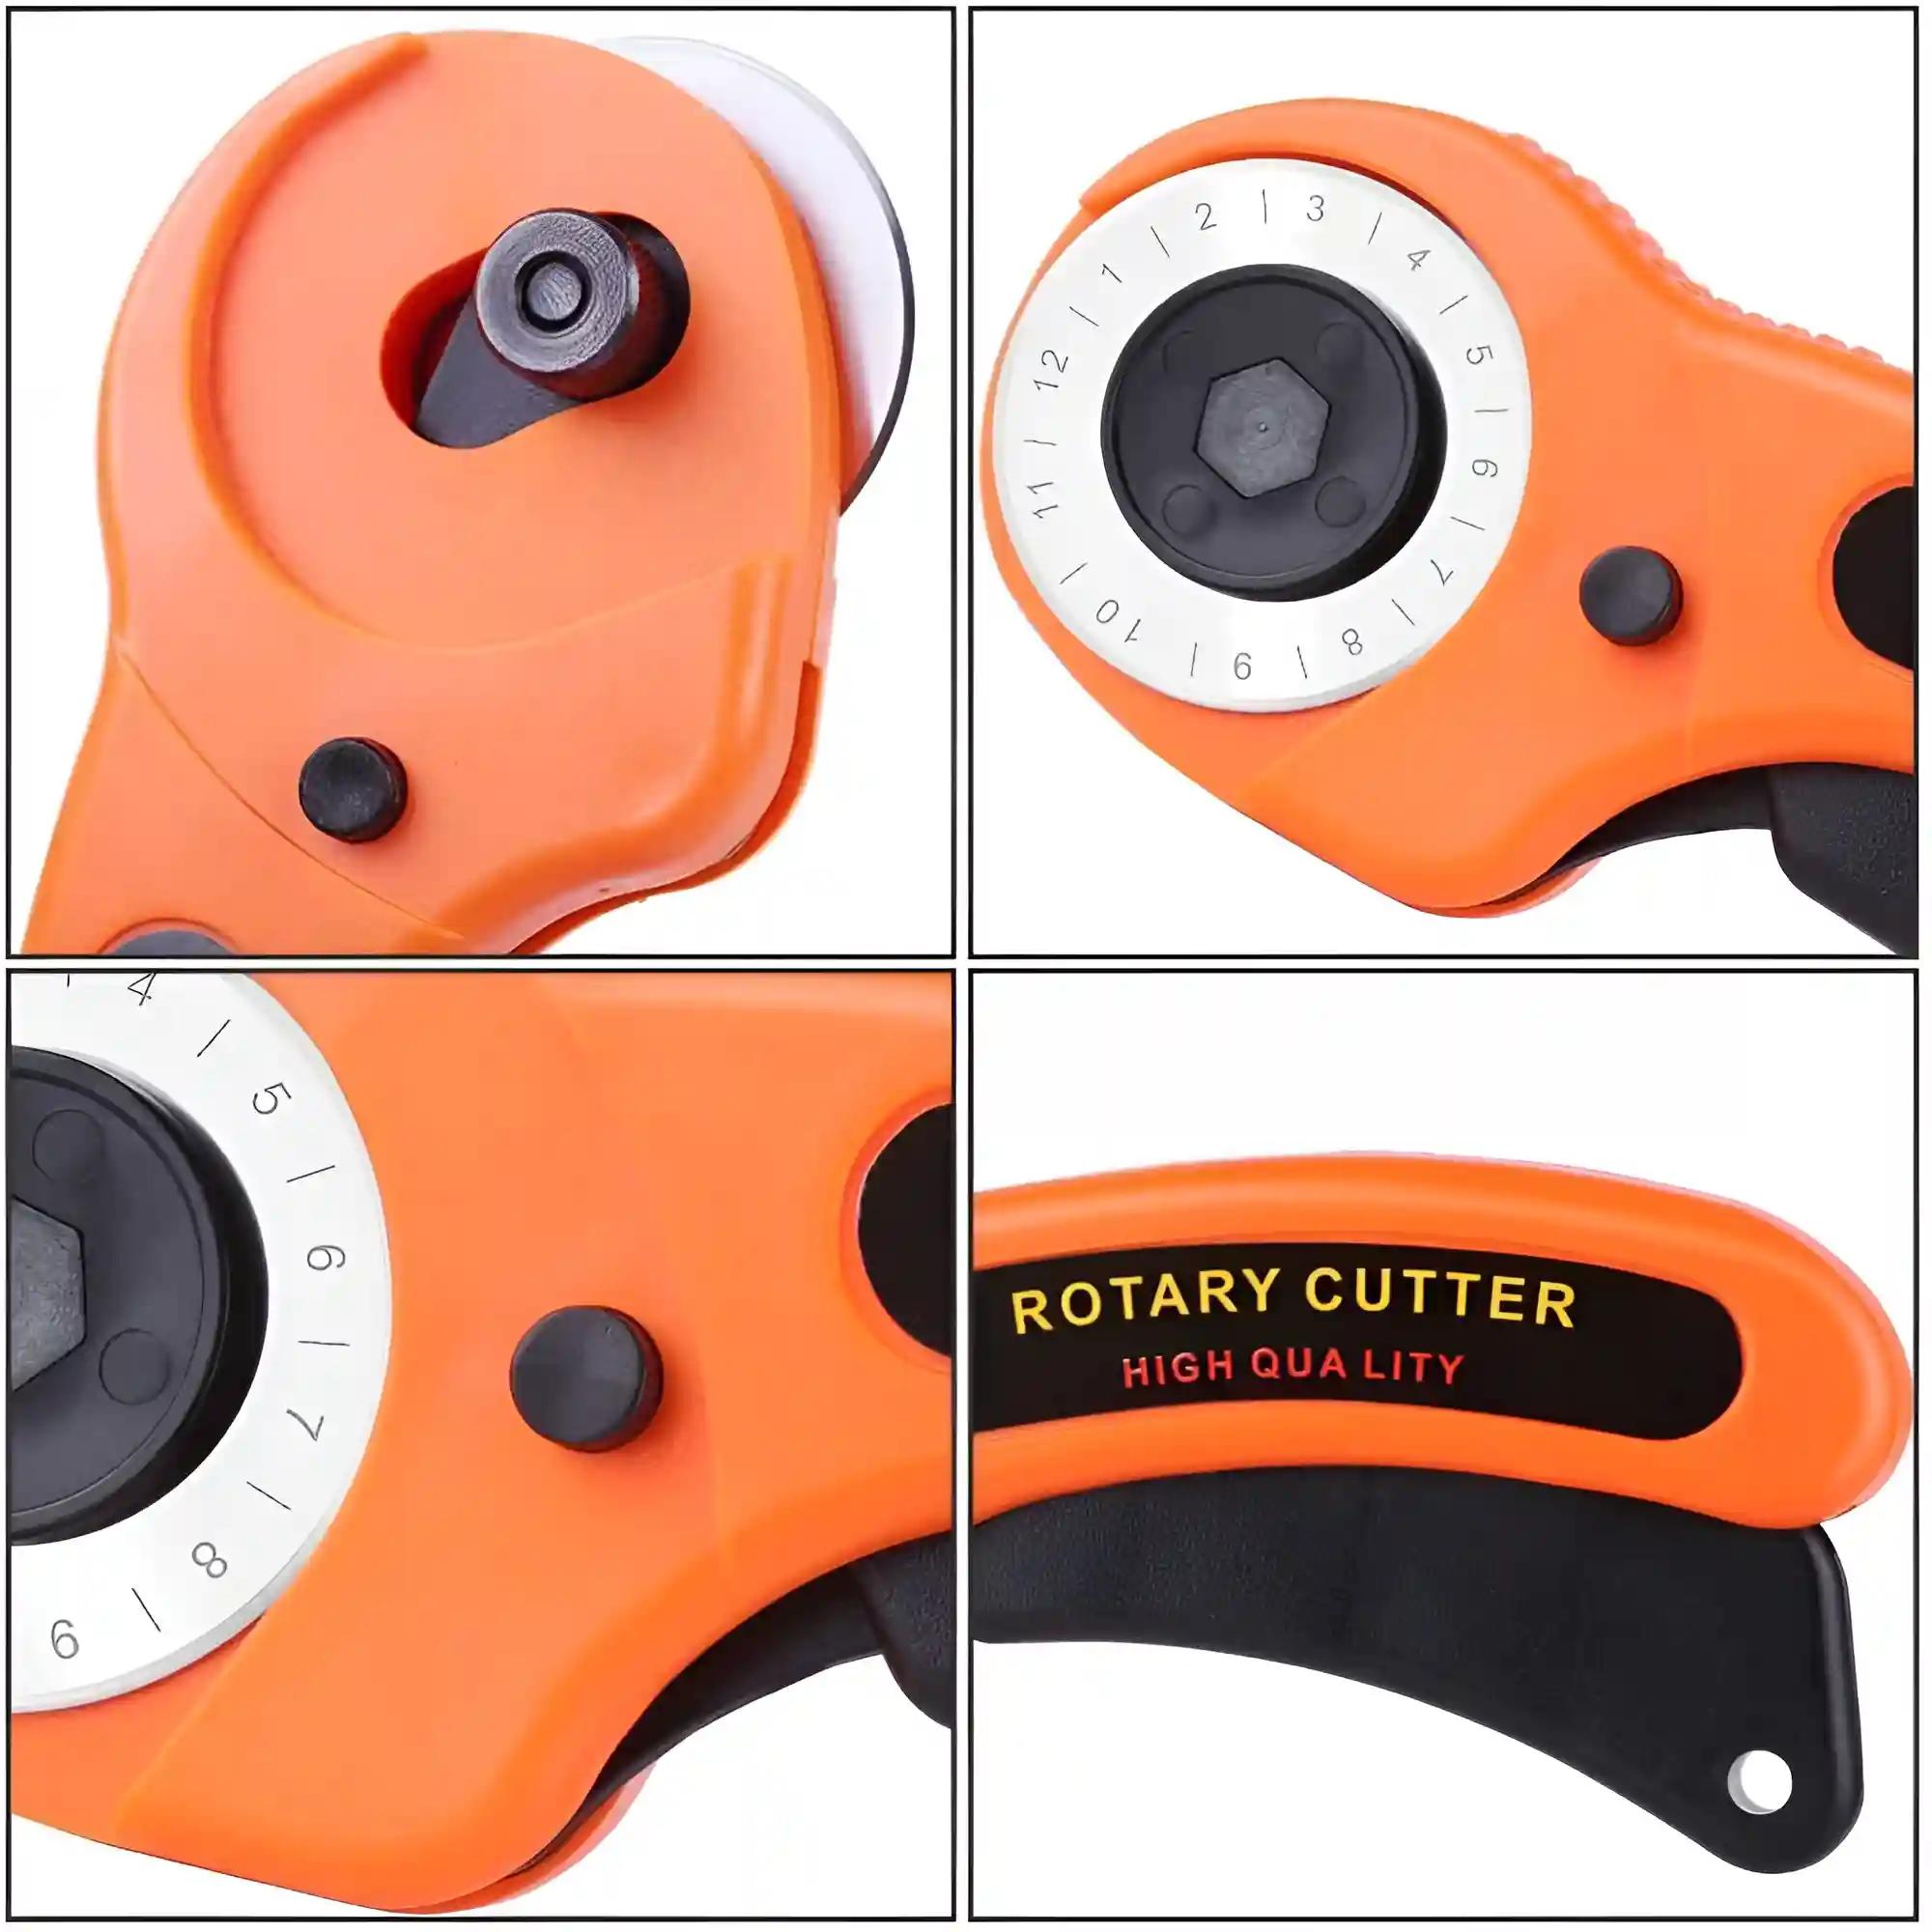 45Mm Blade Rotary Cutter With Safety Lock Cloth Cutting Tool Fabric Cutter Wheel Rotary Cutter Blade For Dense Fabrics Denim Corduroy And Multiple Projects (Multicolour -1Piece)